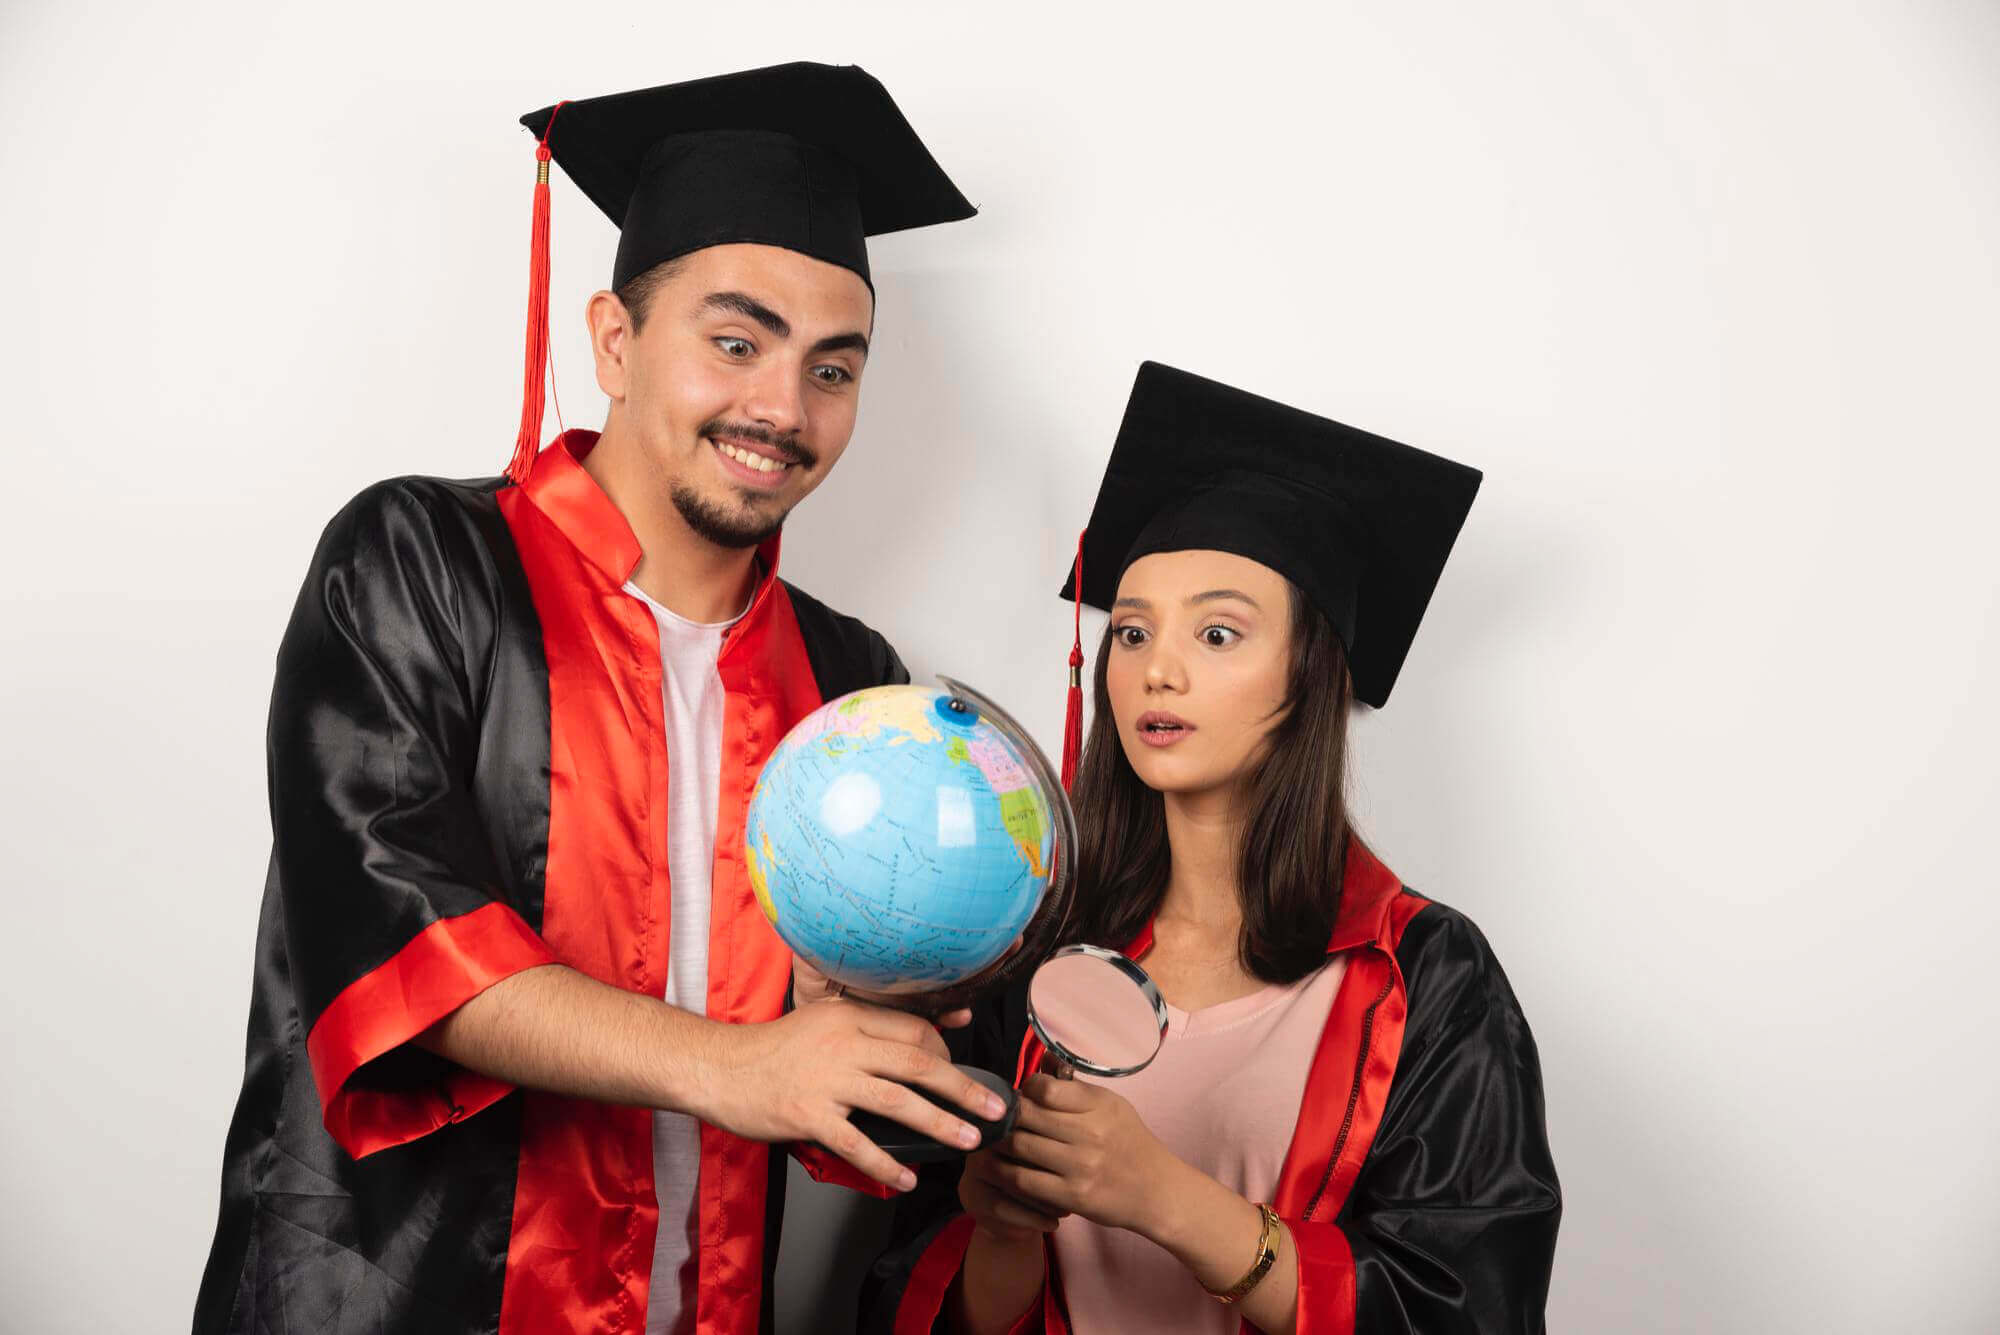 Pursue Postgraduate Studies Abroad After a Three-Year Bachelor's Degree